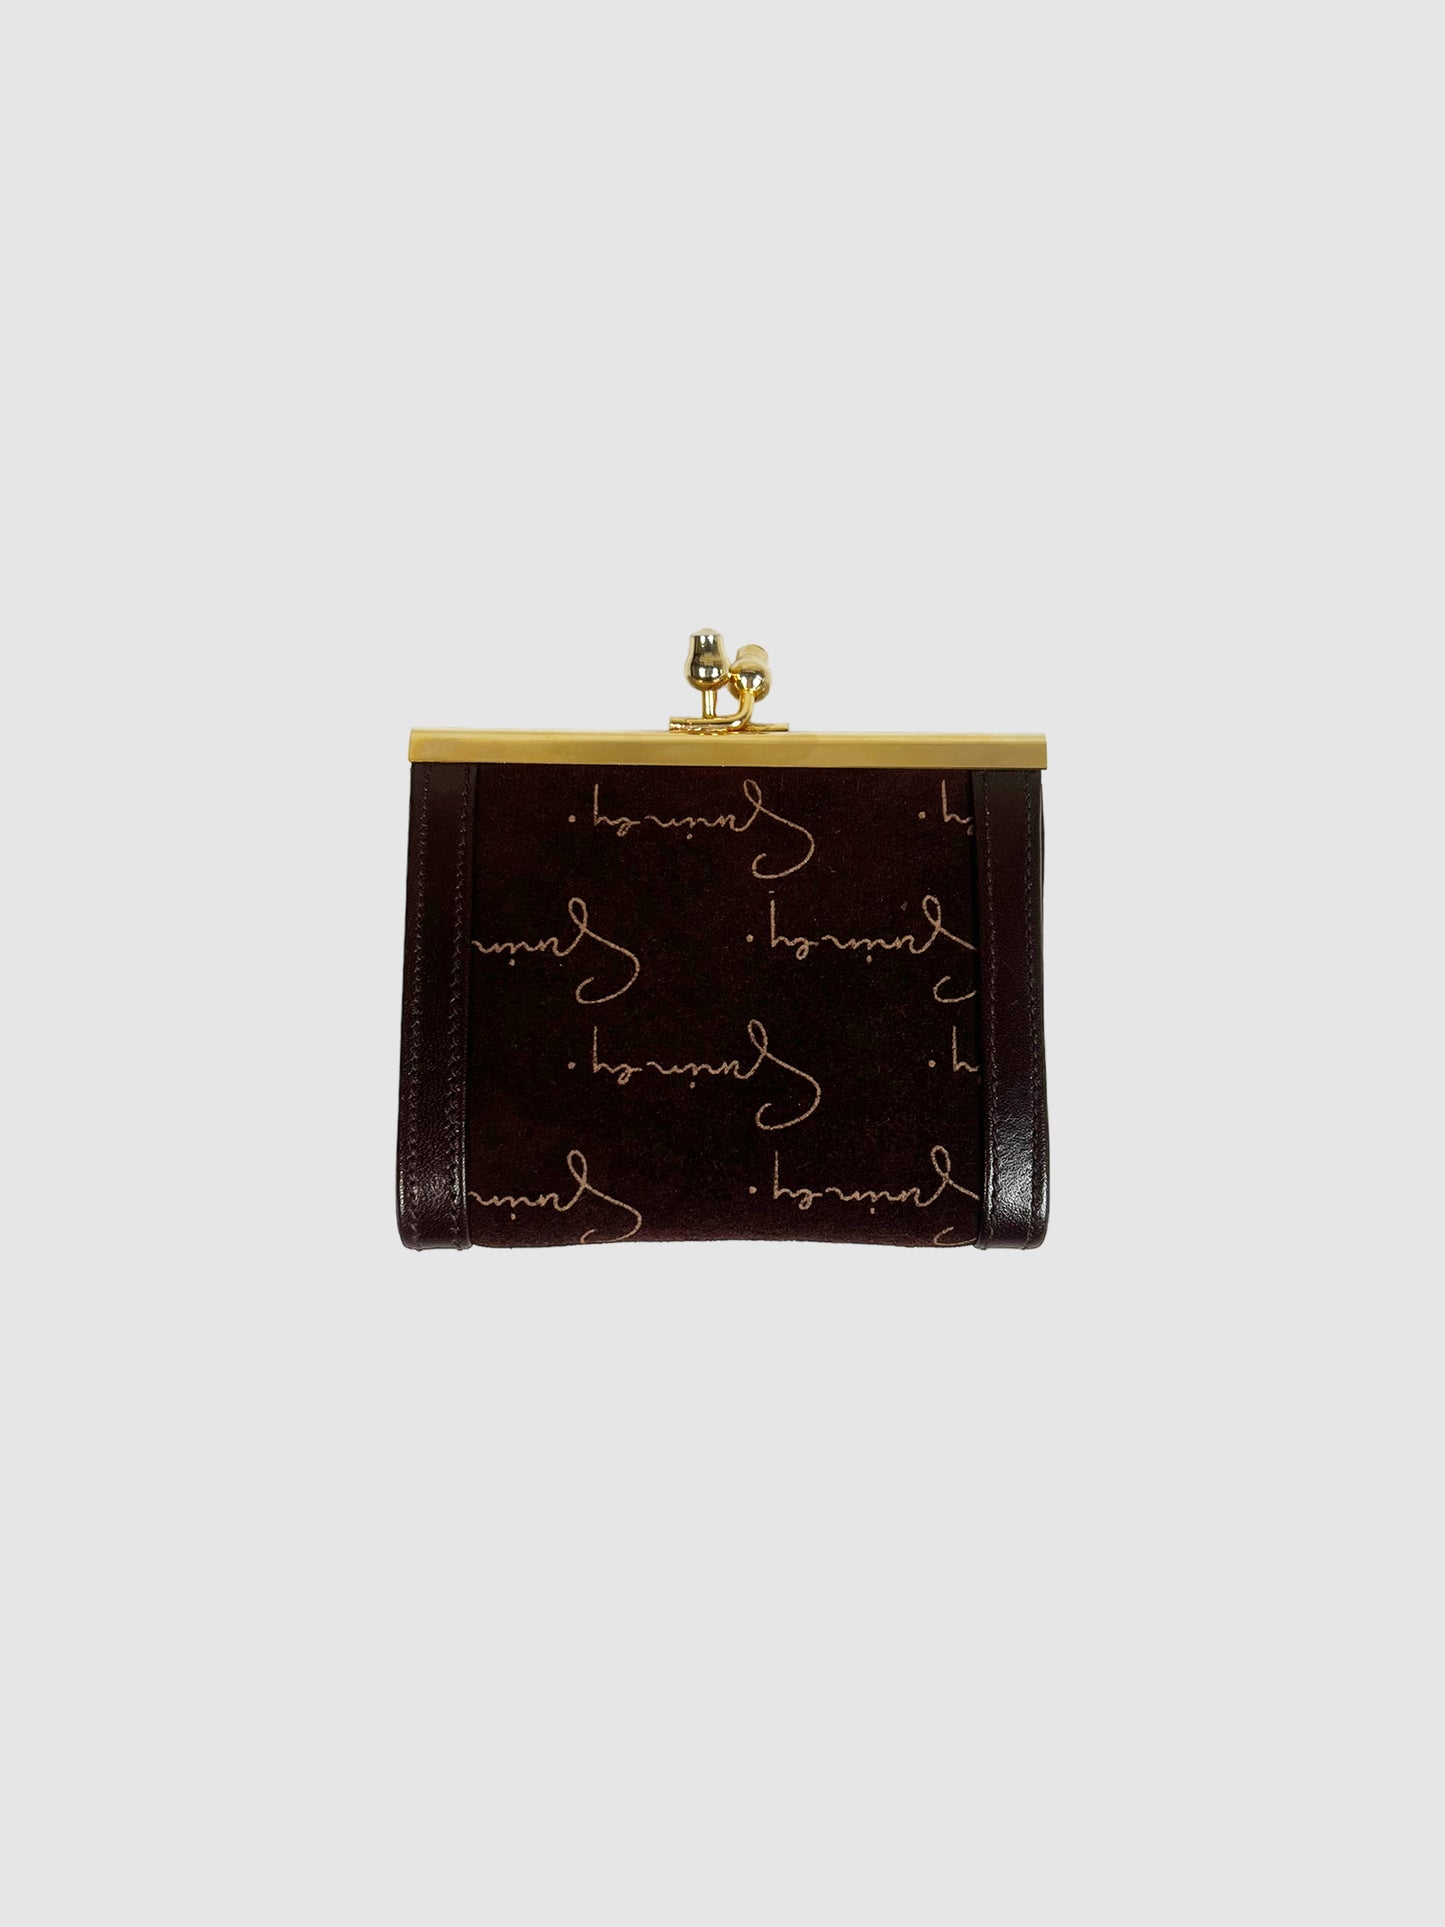 Givenchy Vintage Brown Suede Coin Purse